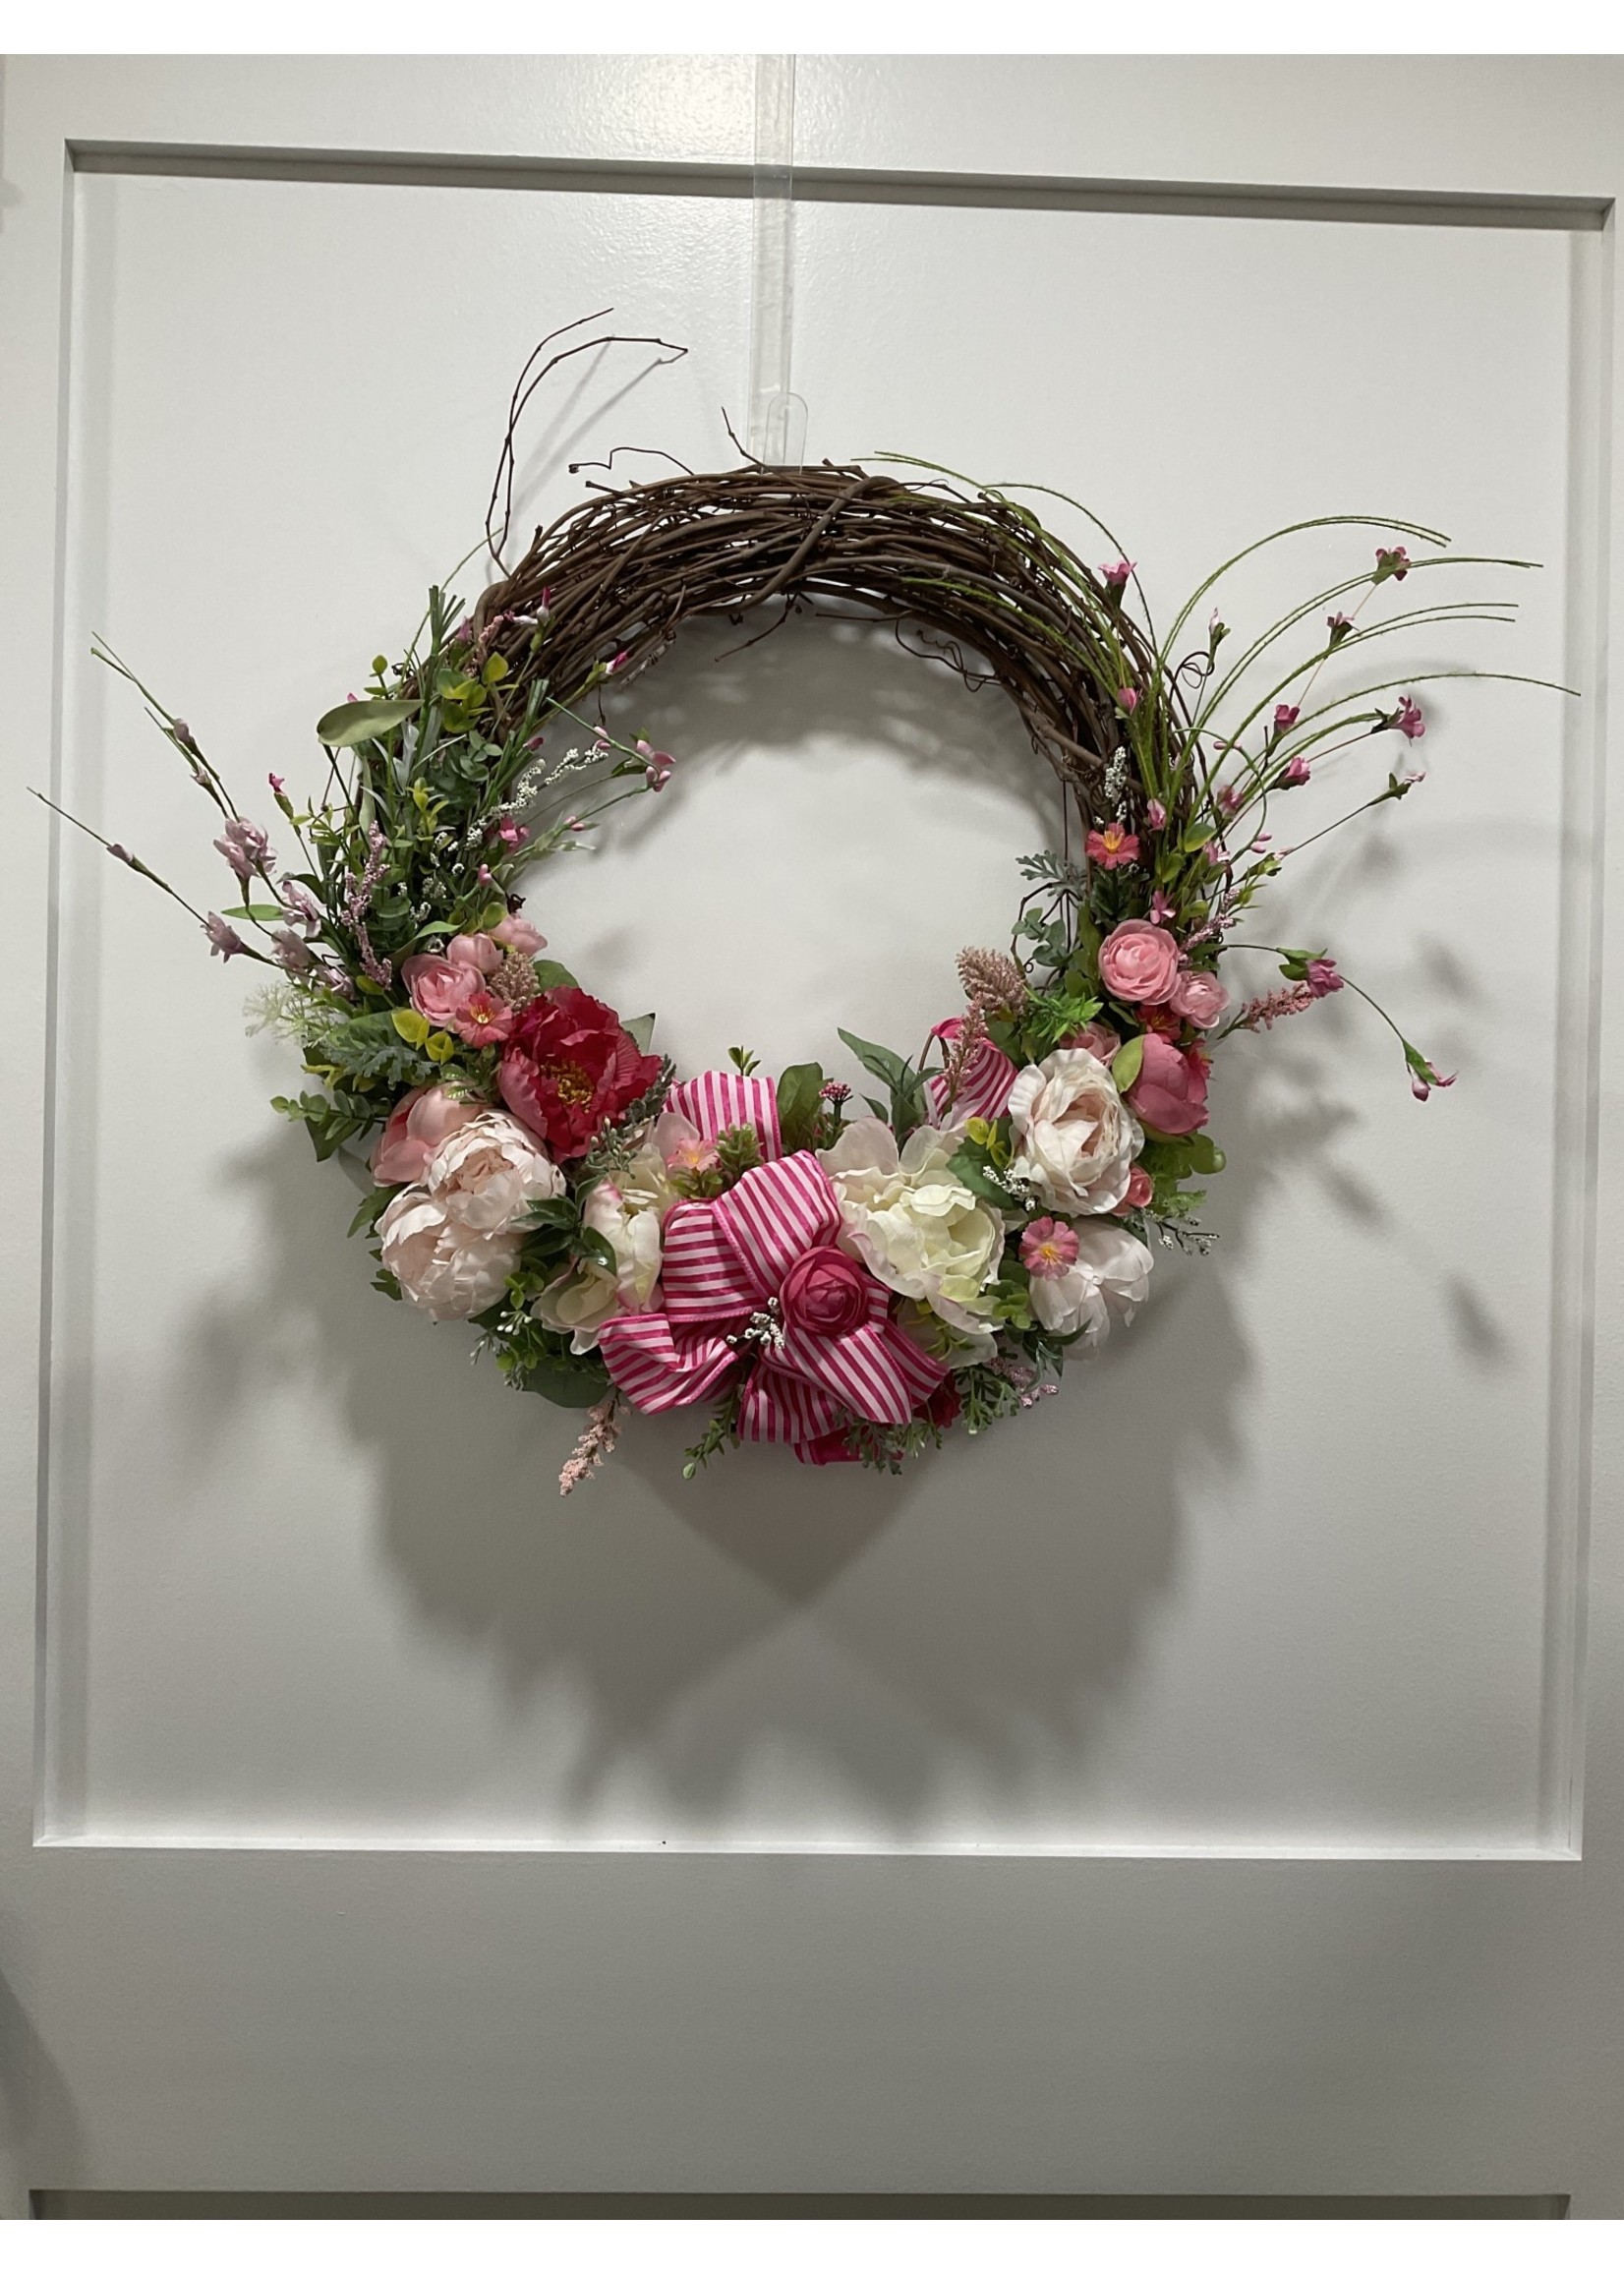 My New Favorite Thing Wreath Grapevine 20 in-Pink and White Flowers w/Hot Pink Striped Bow